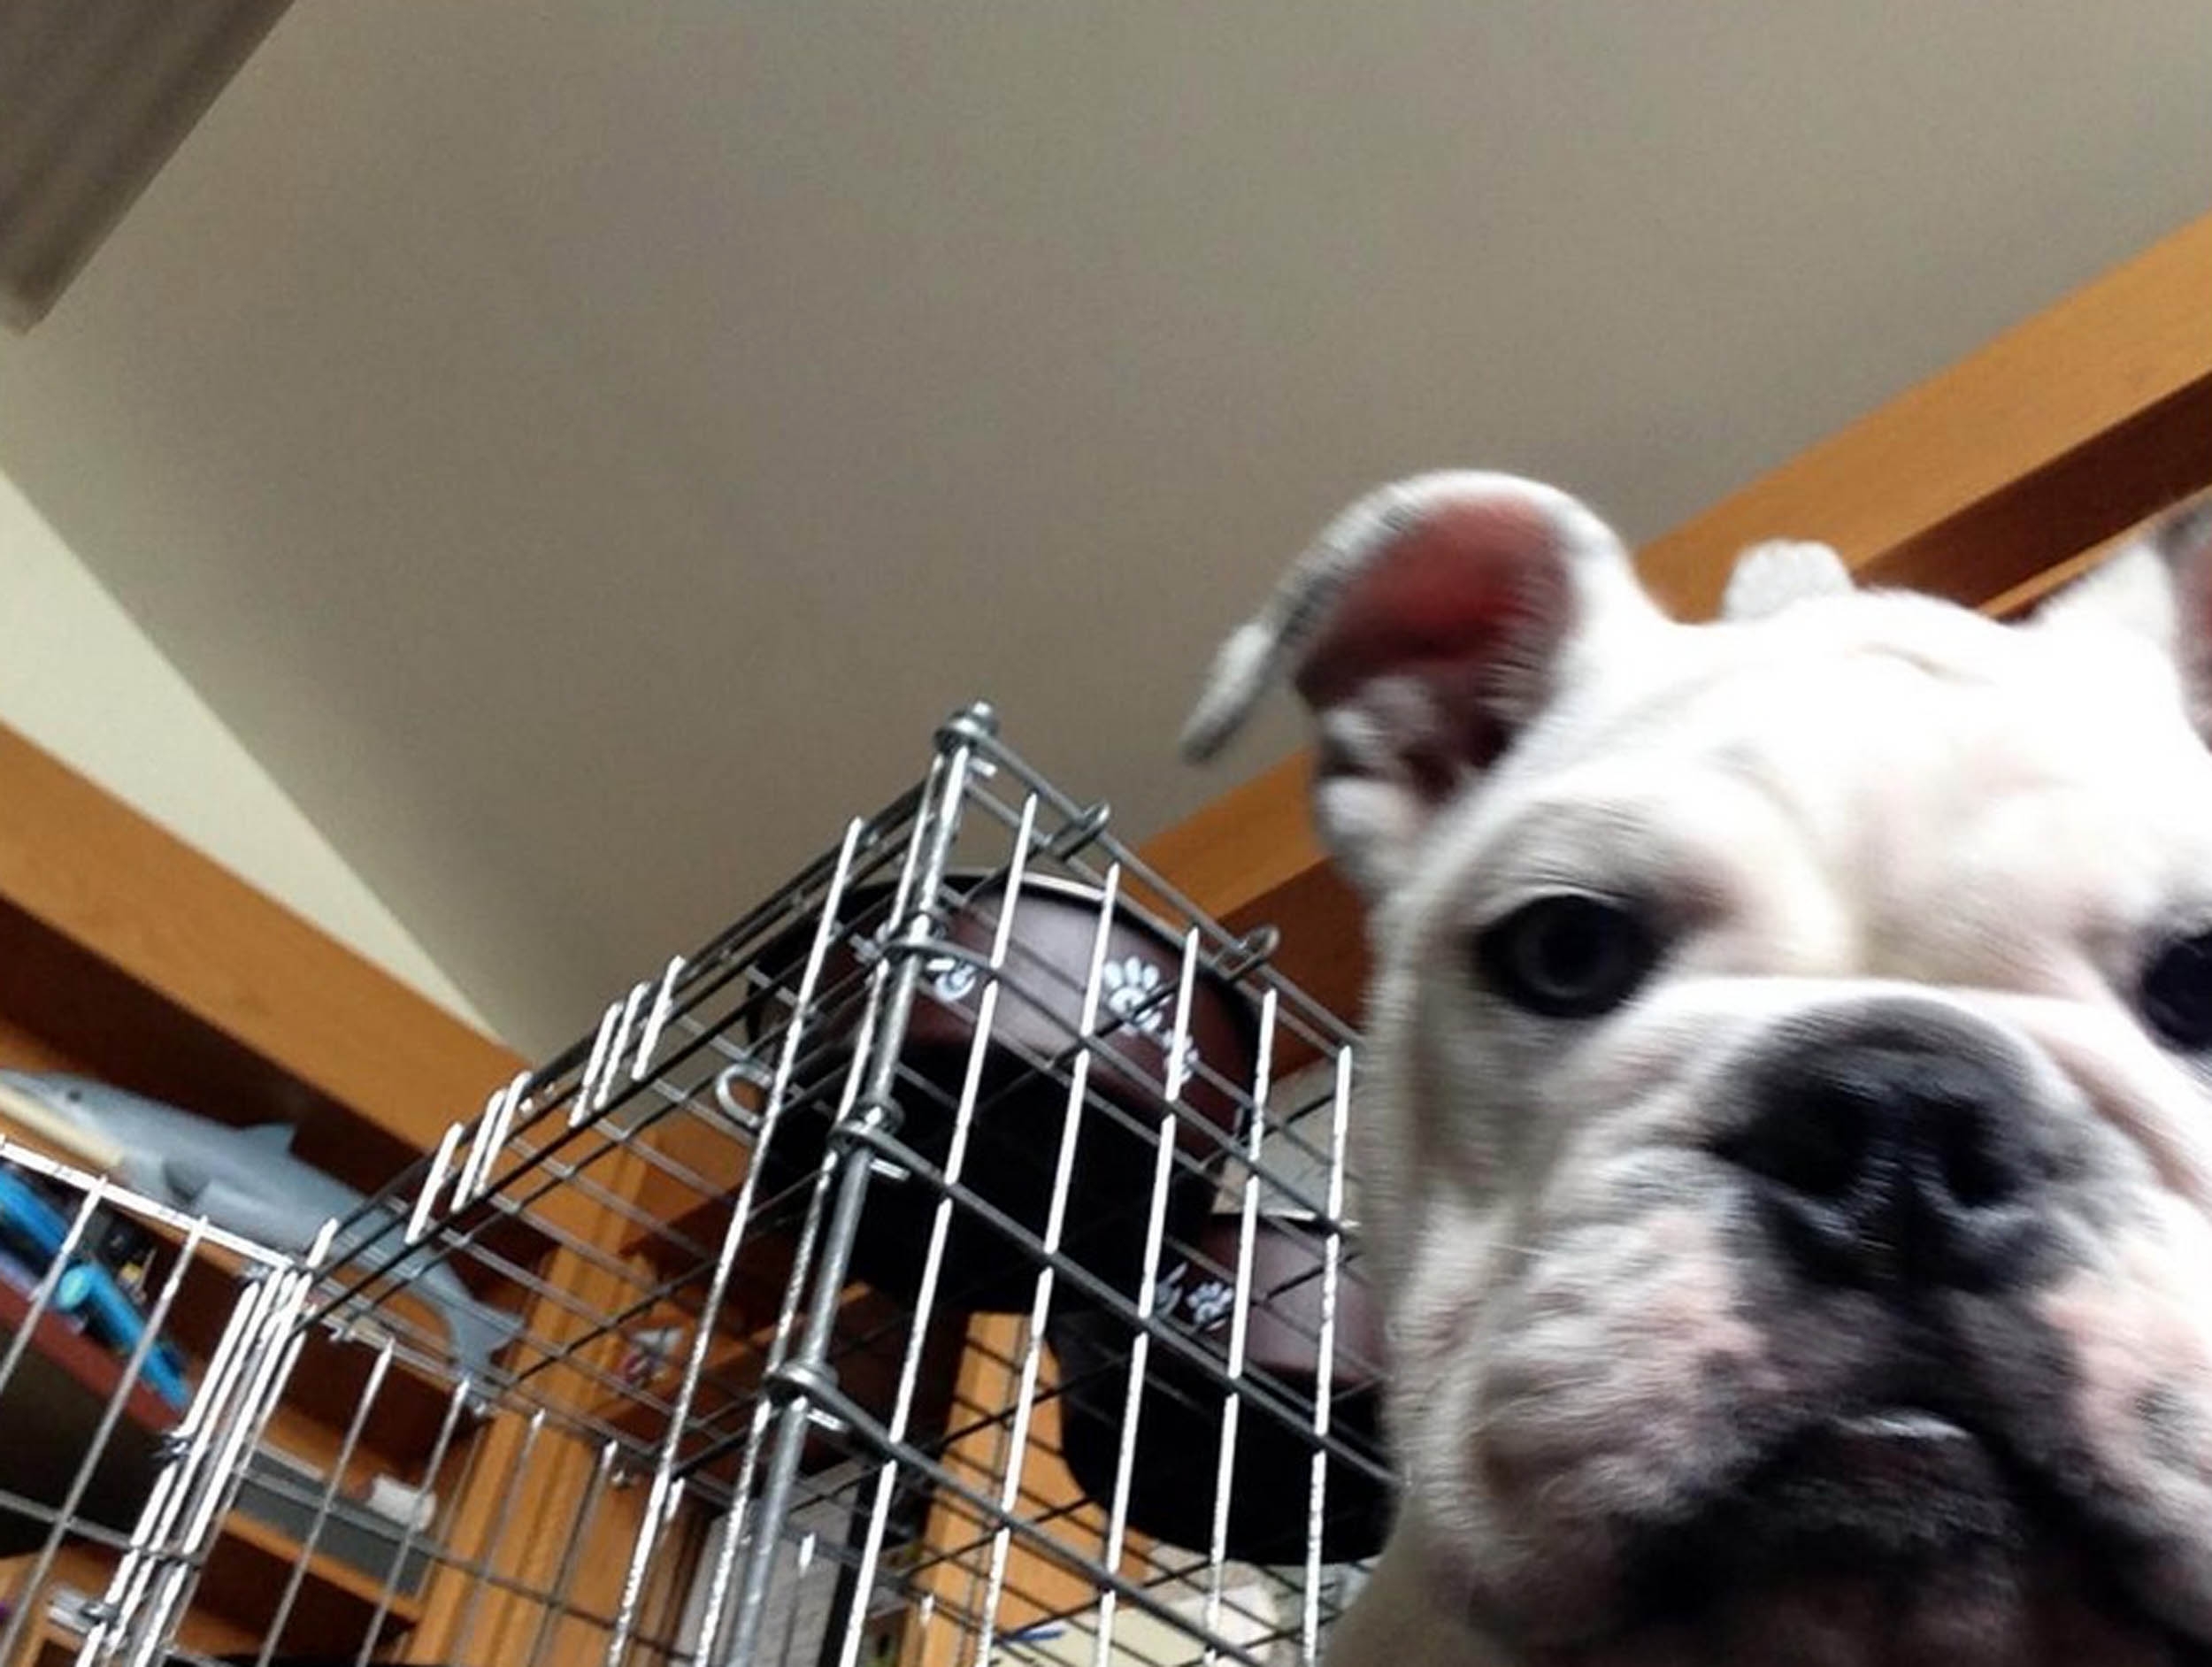 "When a dog takes a selfie on your phone" PETS across the globe are getting in on the selfie phenomenon. Curious cats, dopey dogs and even ham-fisted hamsters are snapping themselves on their owners mobiles - with hilarious results. The pictures, which include a close-up of a one-eyed cat, all were produced when clumsy pets stood on their owners phones or iPads. The results are varied - some pictures show cats looking down into the camera with their chin appearing extremely enlarged, and in others a dogs nose takes up most of the photo.